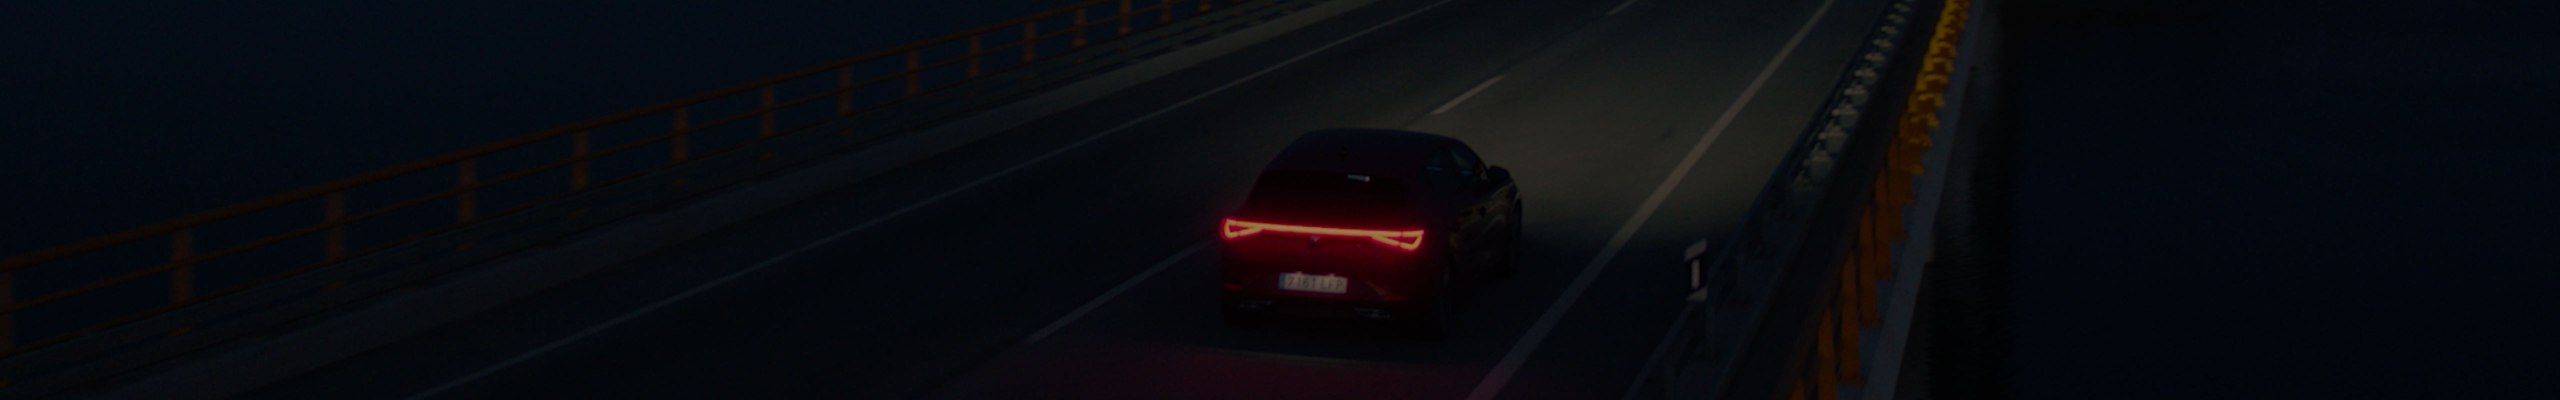 The lights of the SEAT Leon 2021 in the darkness